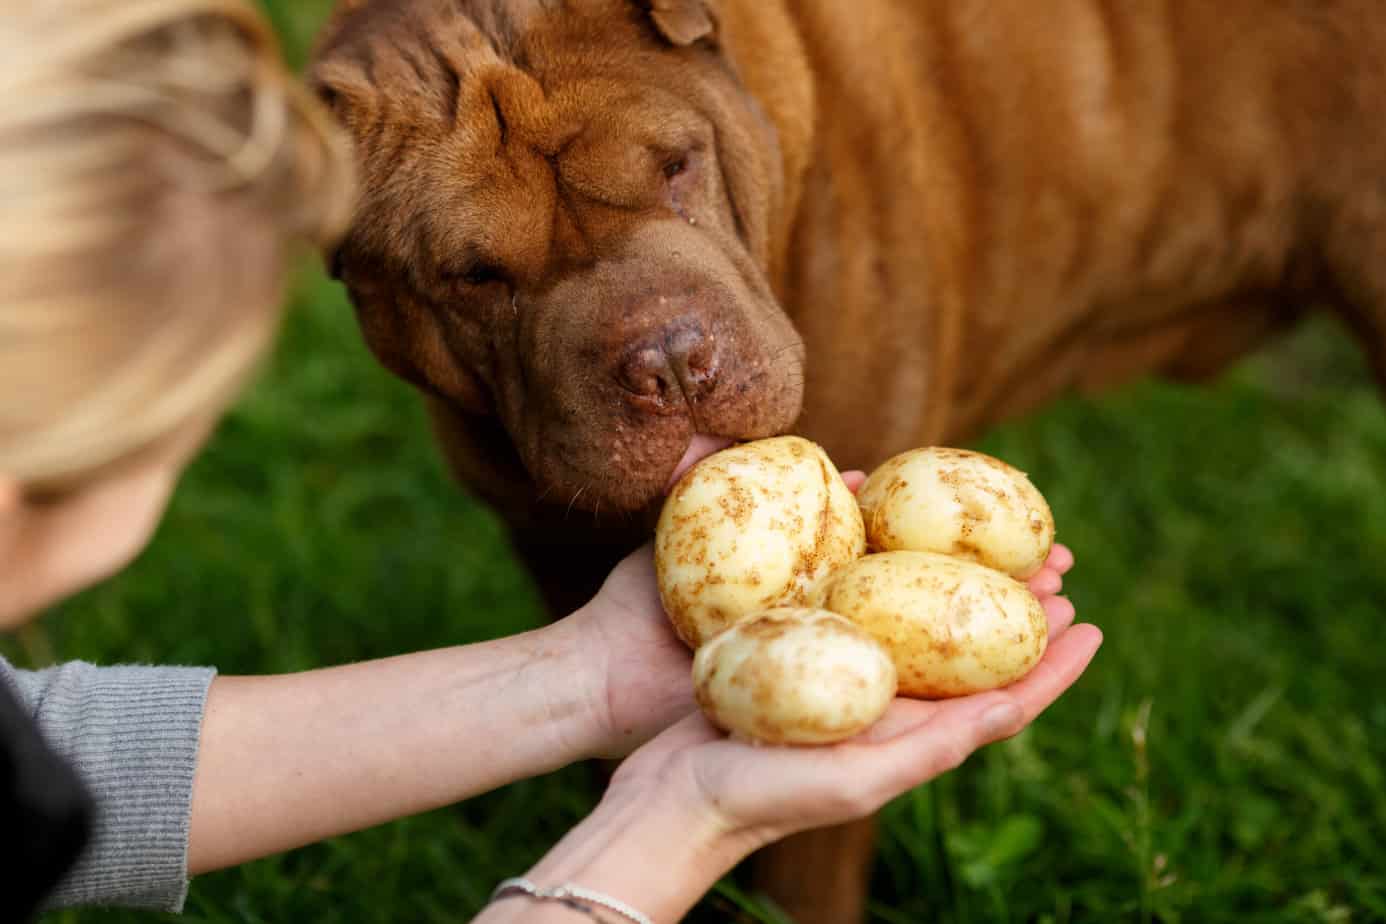 are potatoes good for my dog